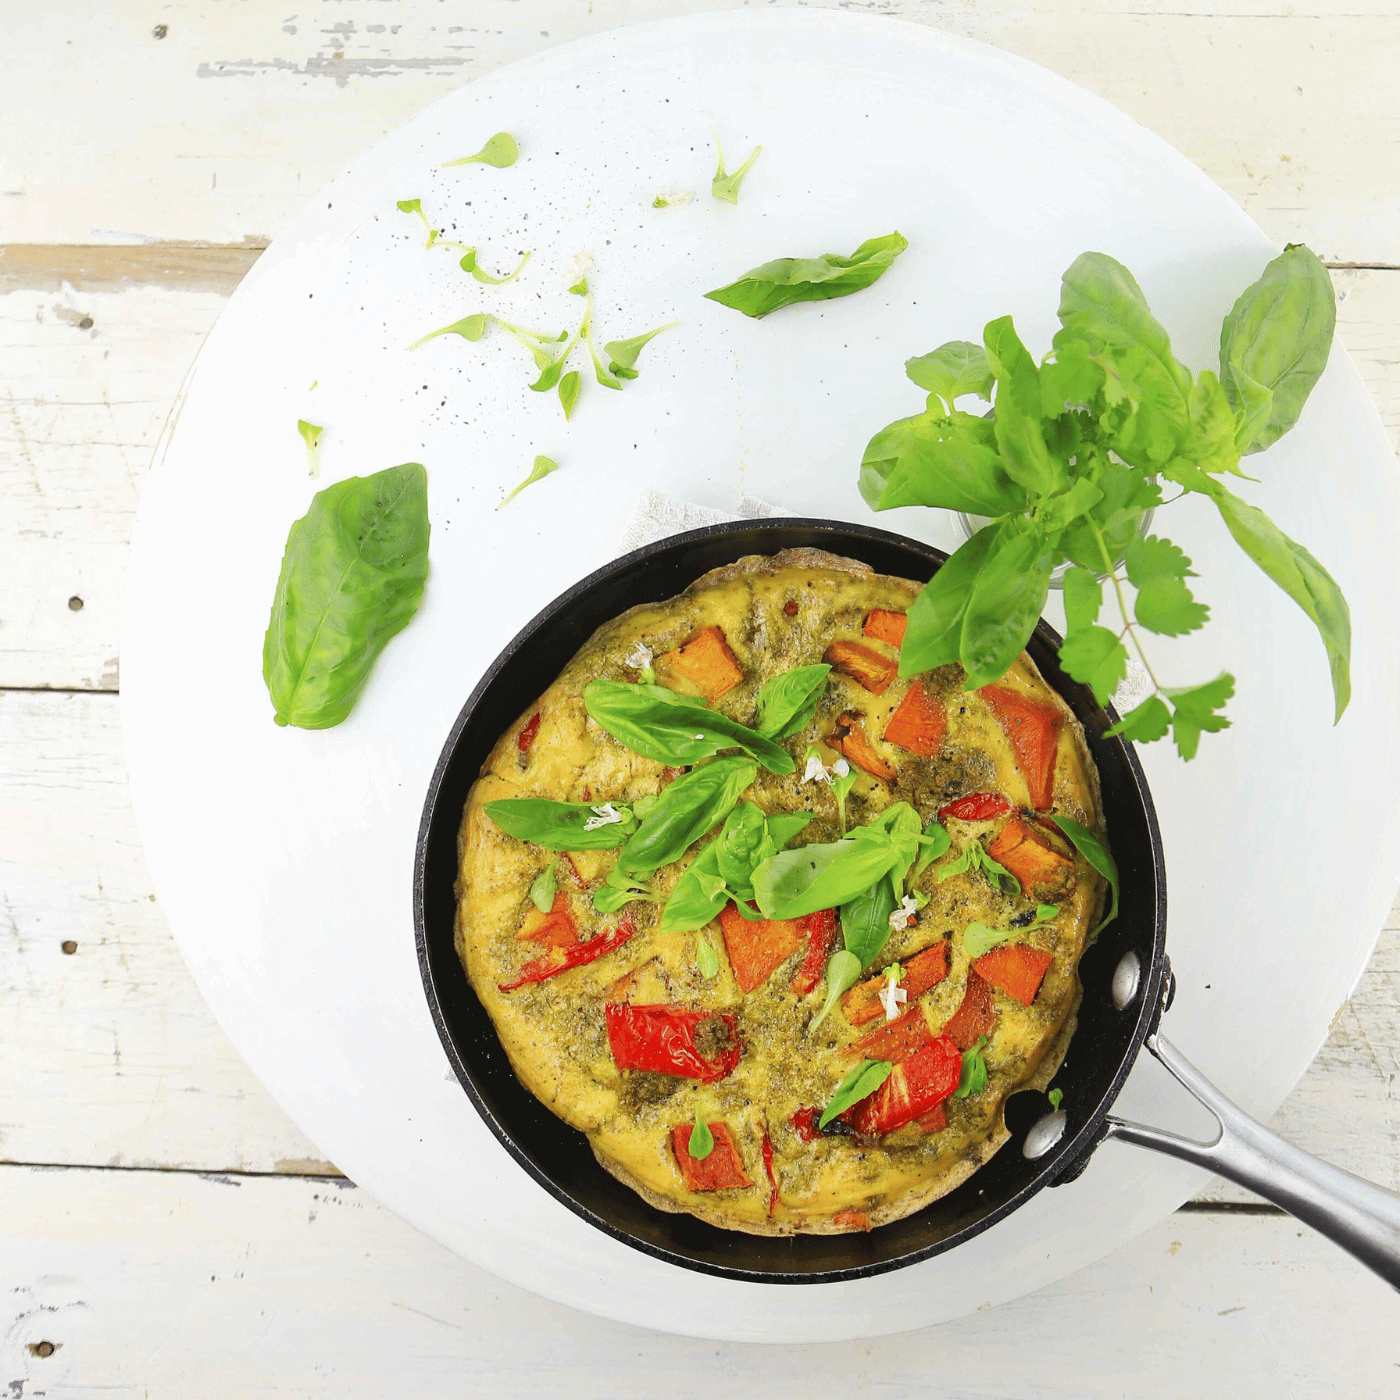 4 Ingredients 'Healthy Diet' cookbook: Image of an omelette with fresh vegetables in a frying pan, sprinkled with basil and seasoning.